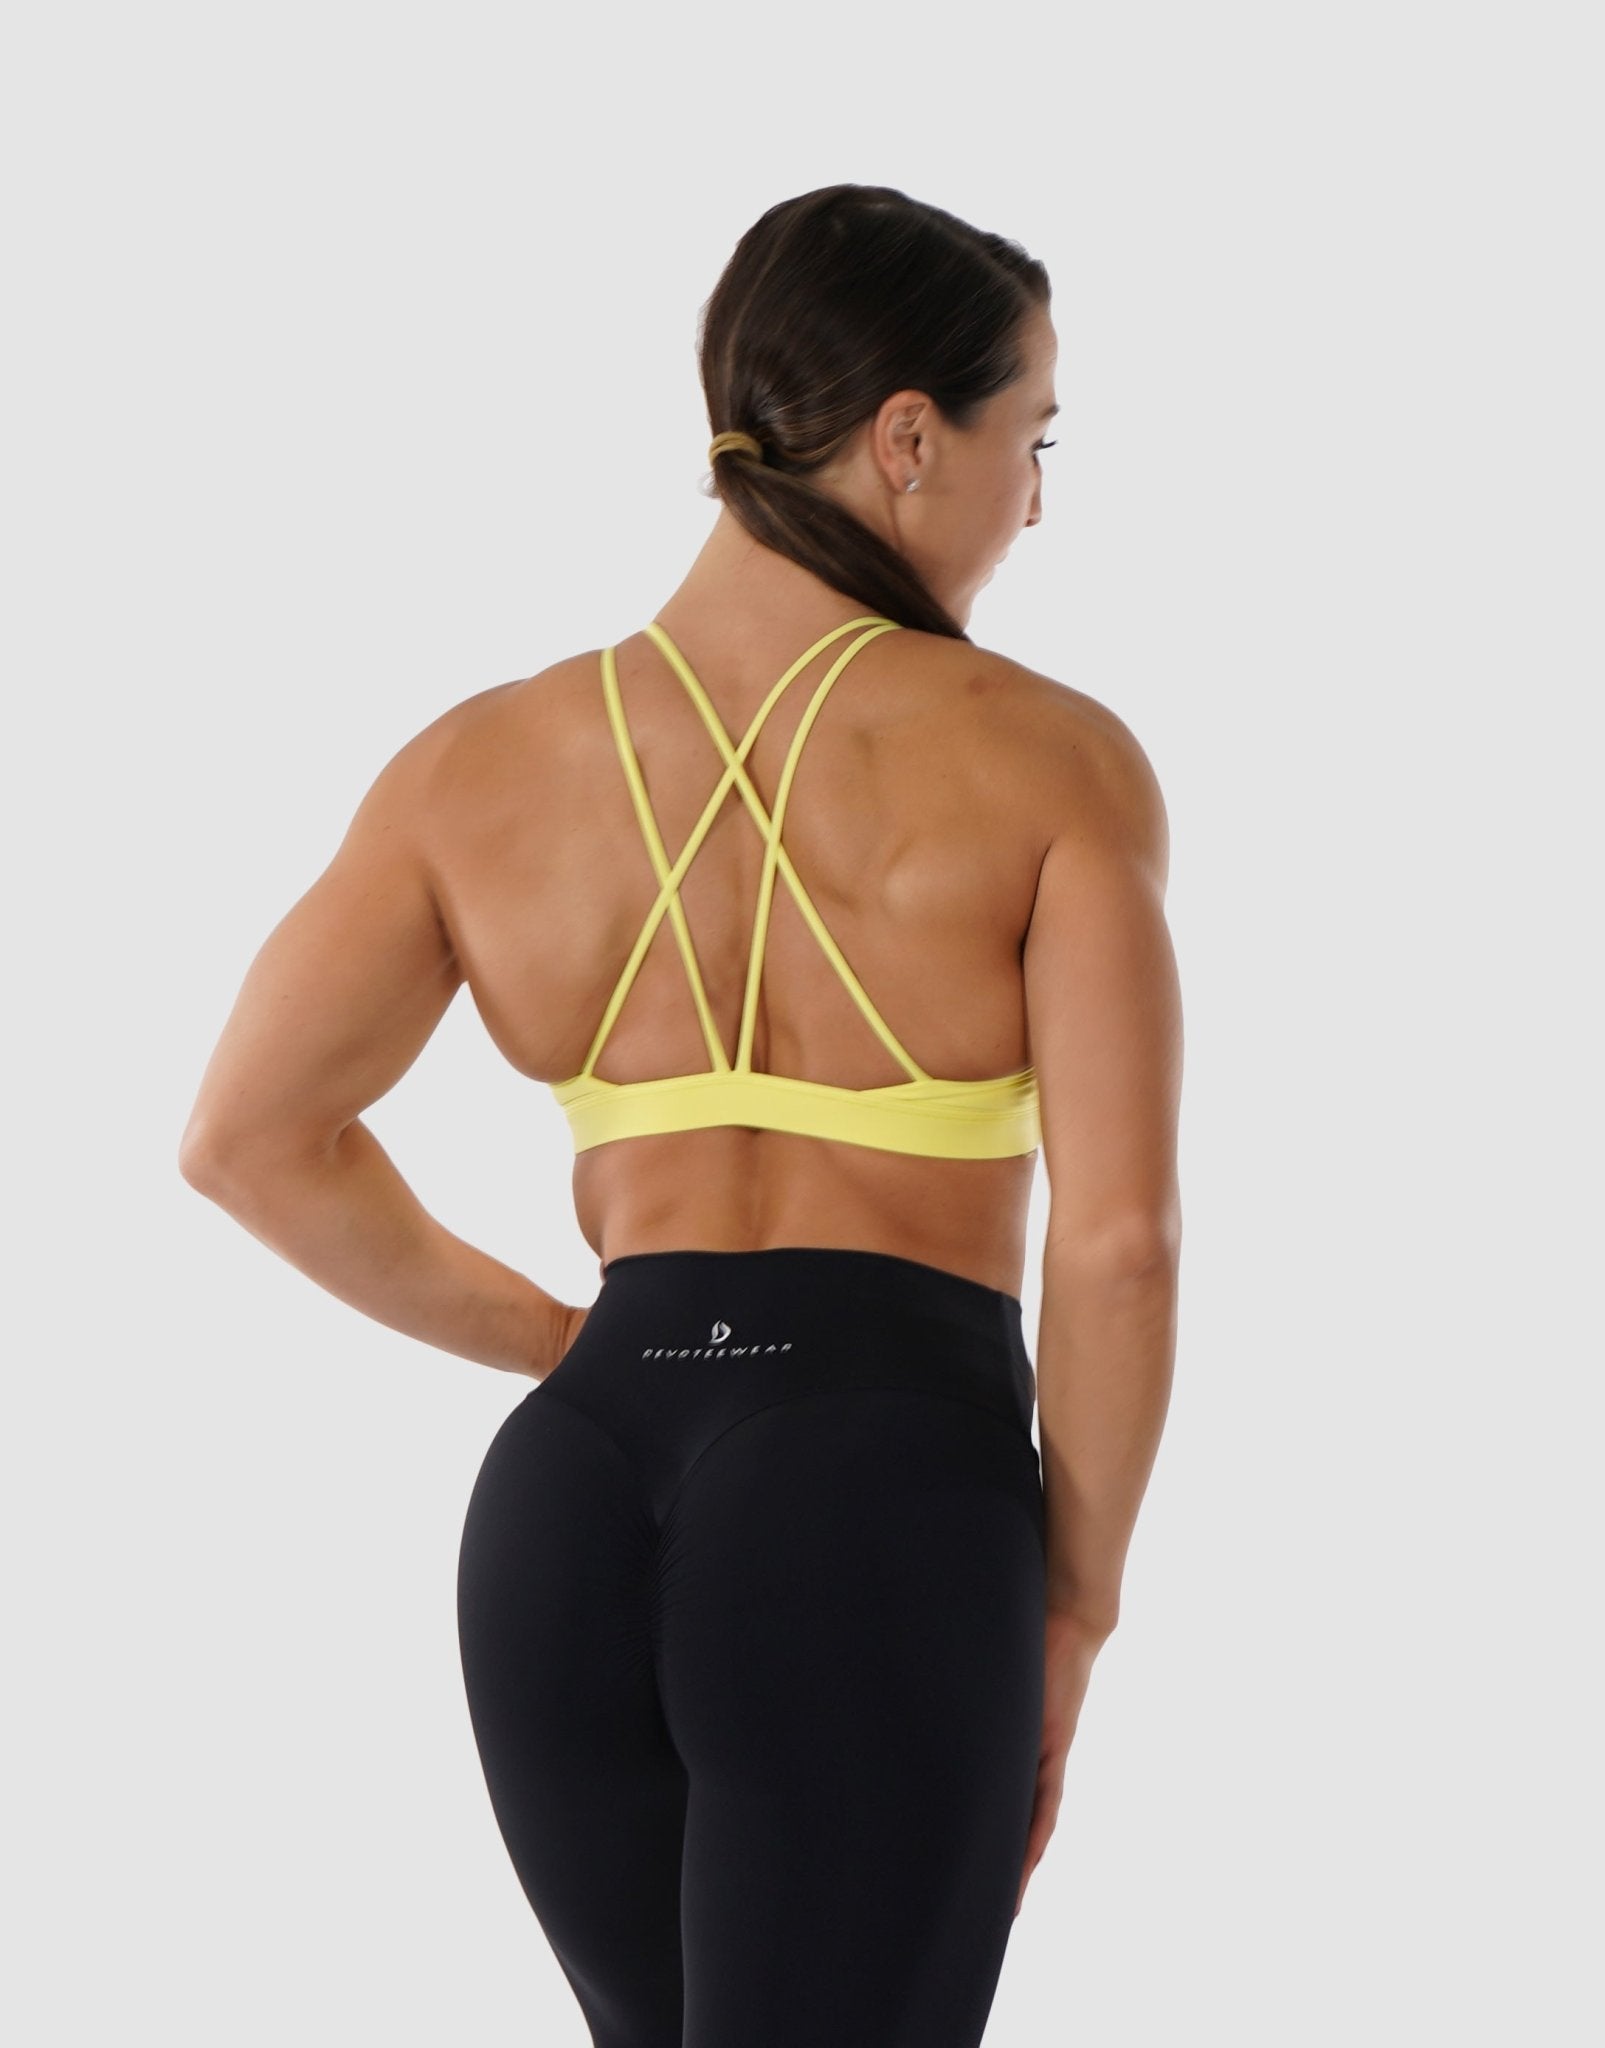 Women's - Fitted Fit Sport Bras or Sleeveless or Long Sleeves or Pants or  Hoodies and Sweatshirts in Pink or White or Blue or Brown for Training